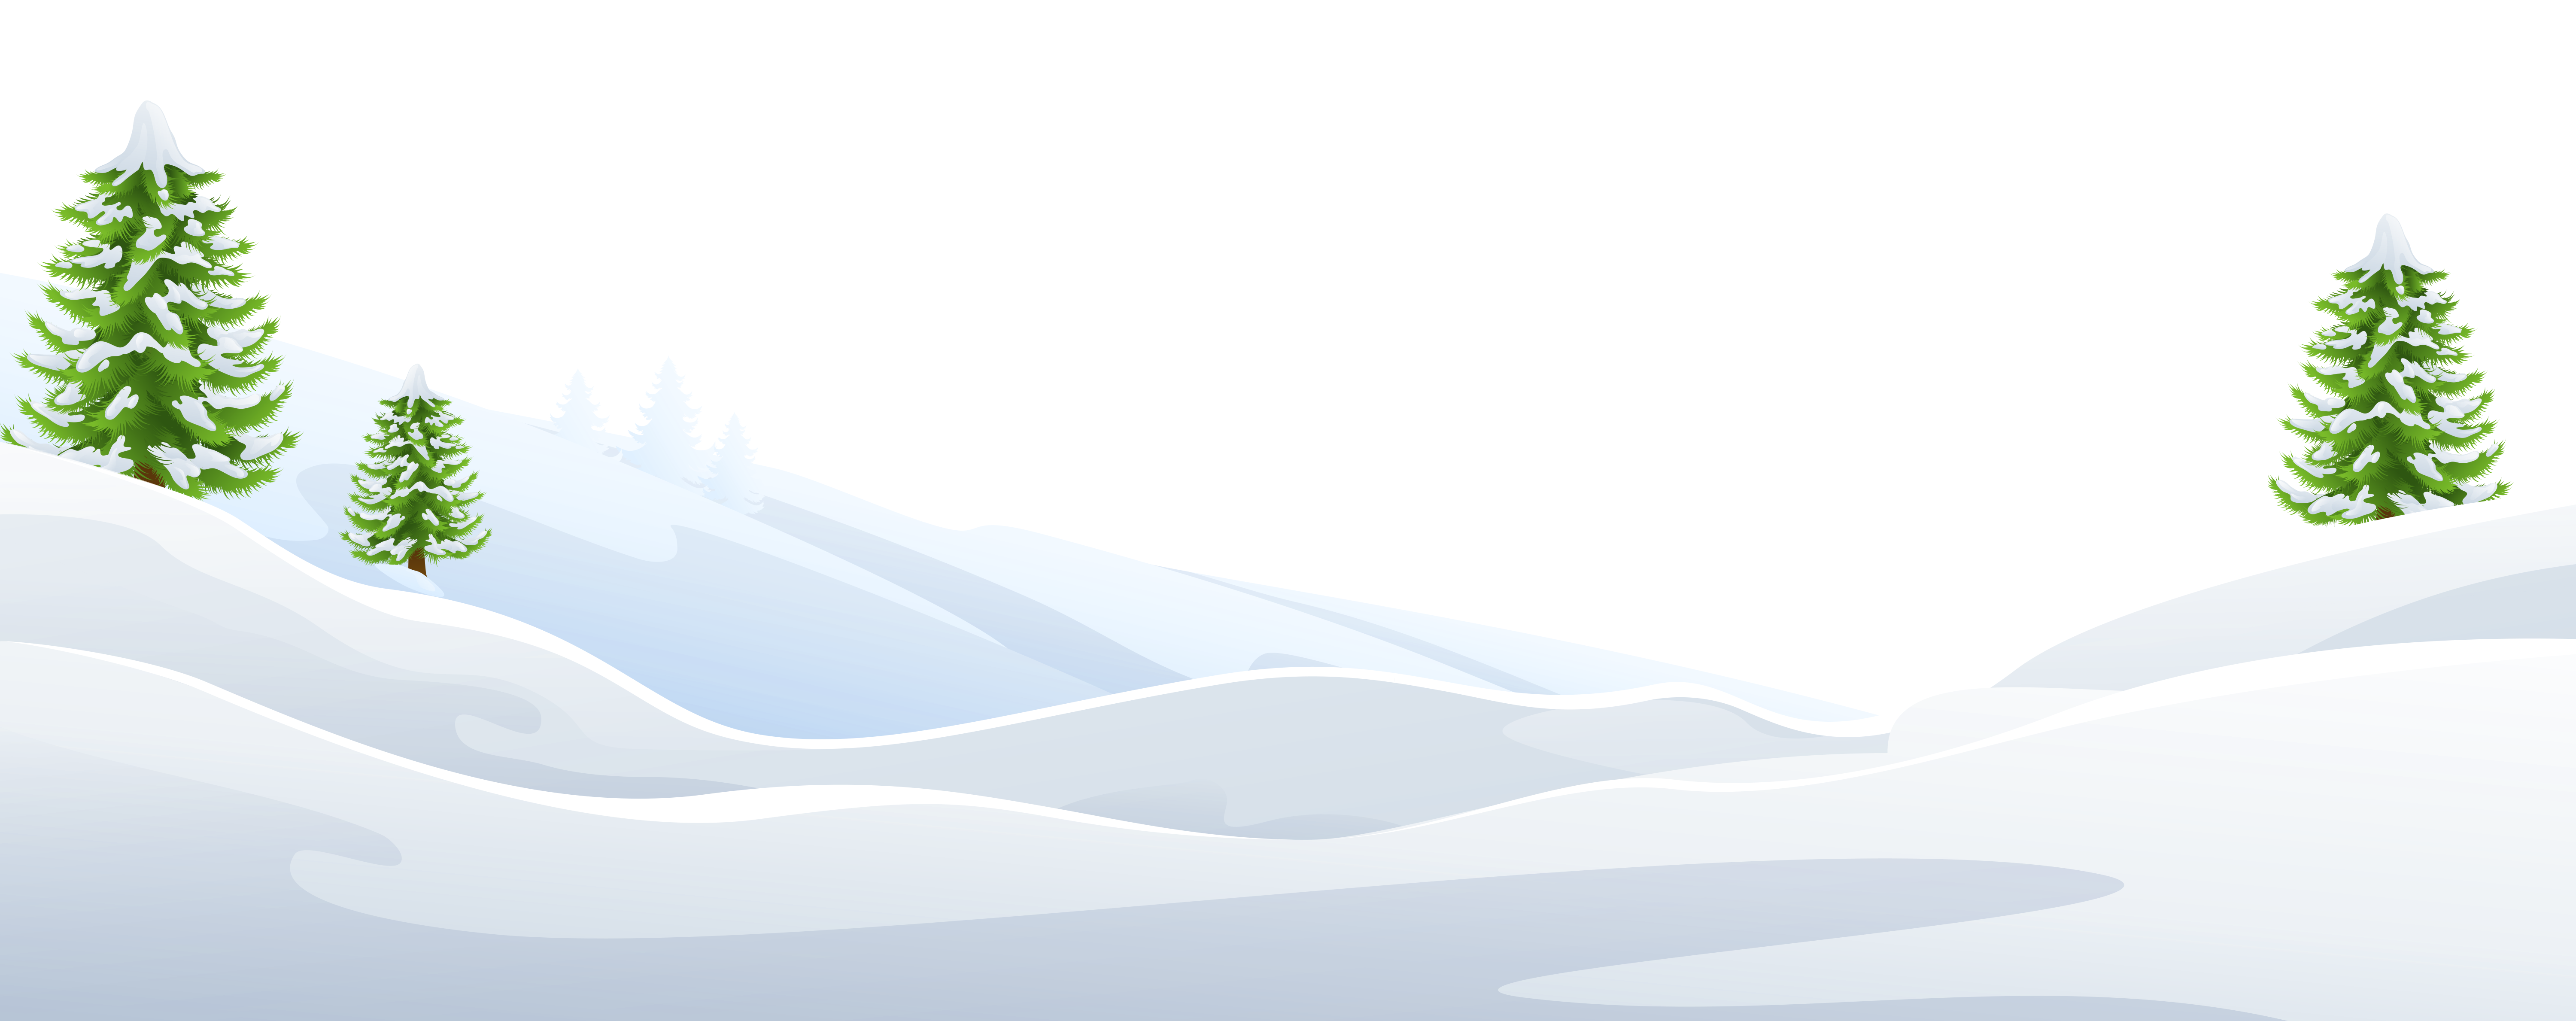 Winter clipart mountains. Snowy ground with trees